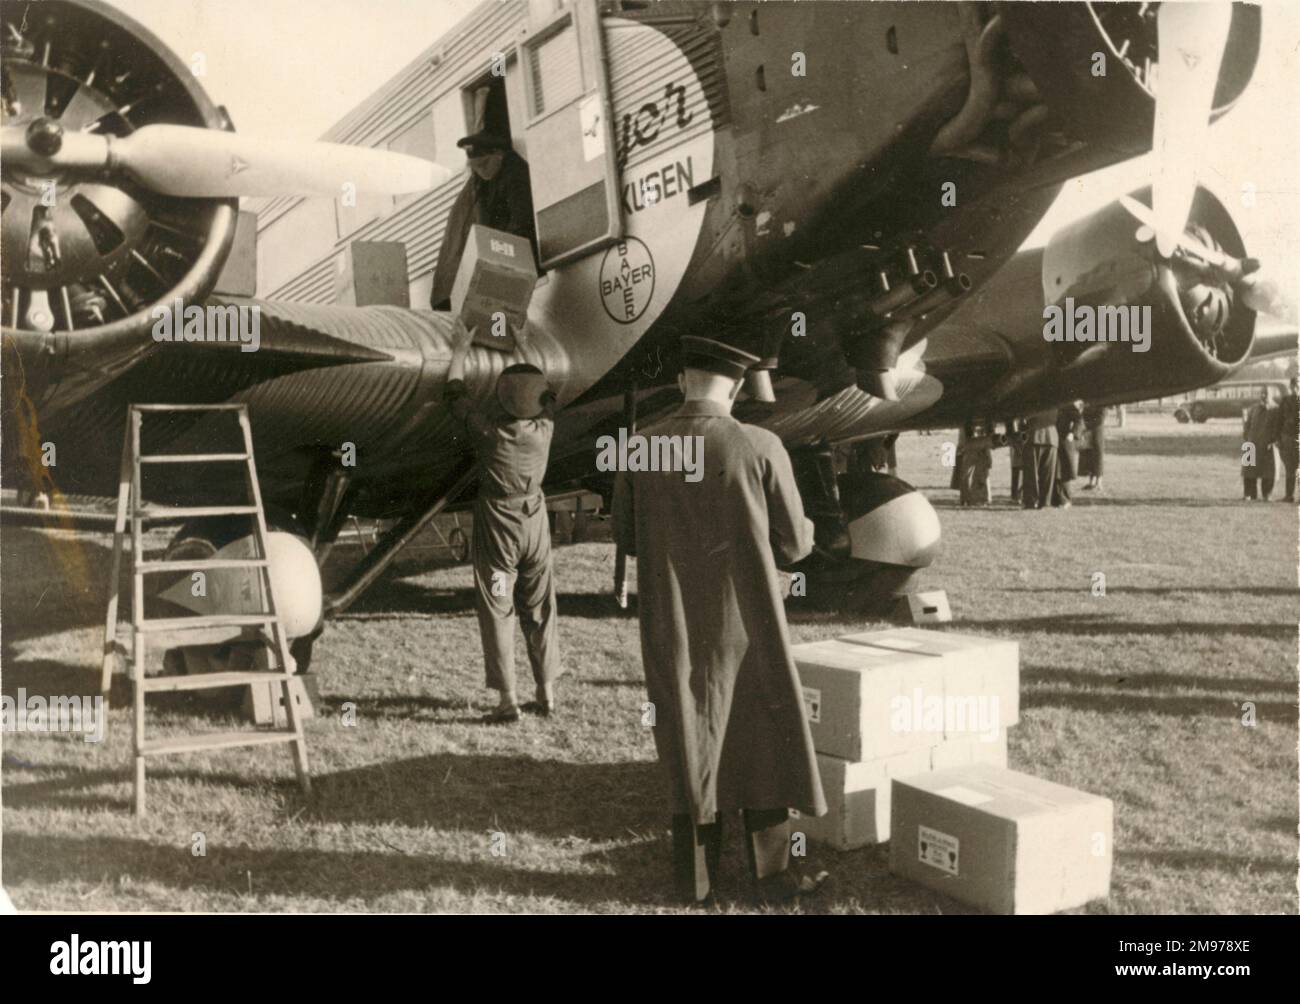 Junkers Ju52/3m being loaded. Stock Photo